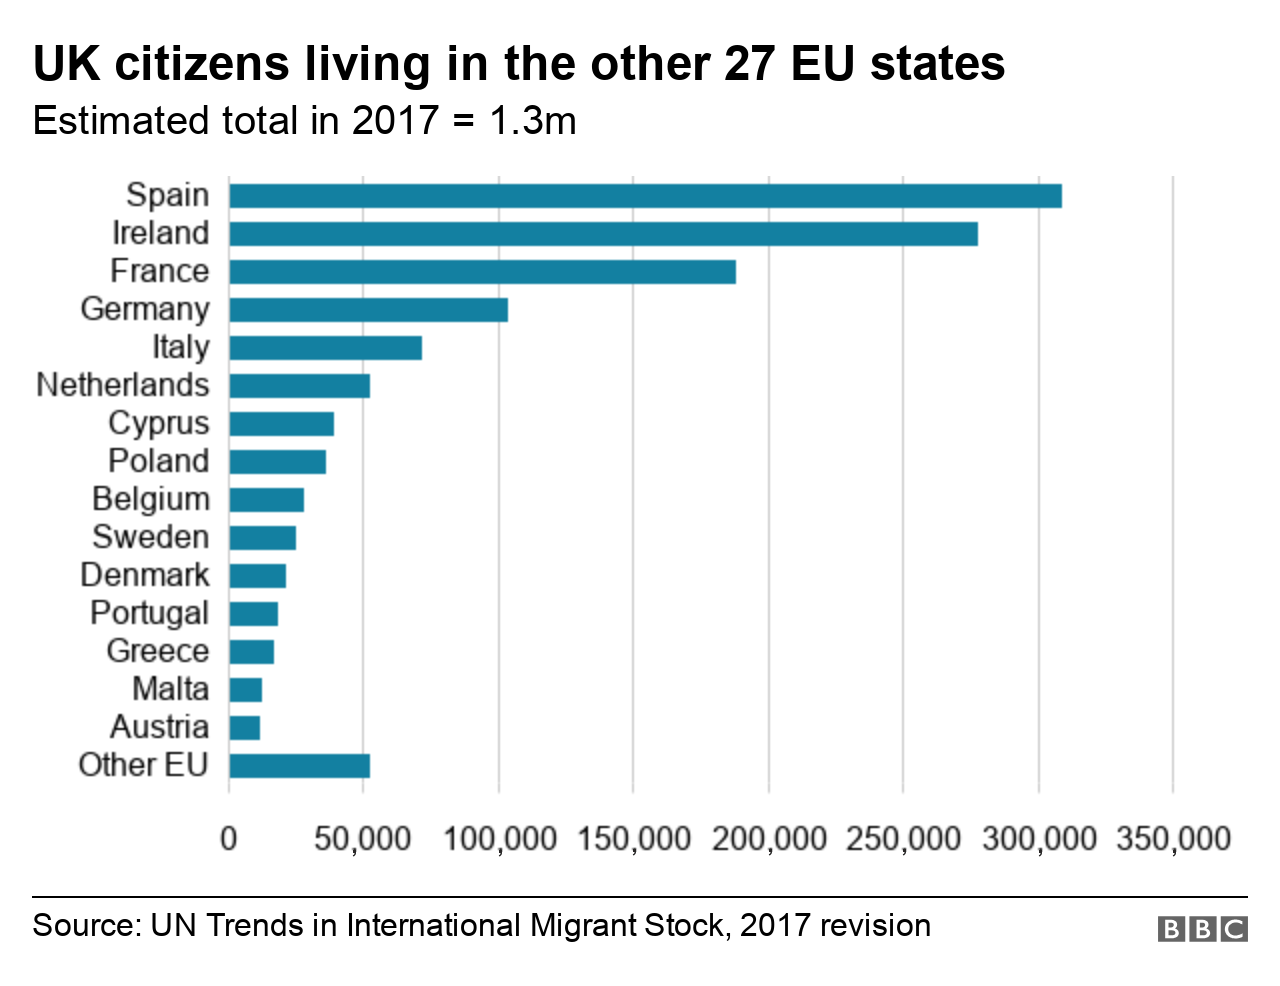 Graphic showing numbers of UK citizens in EU27